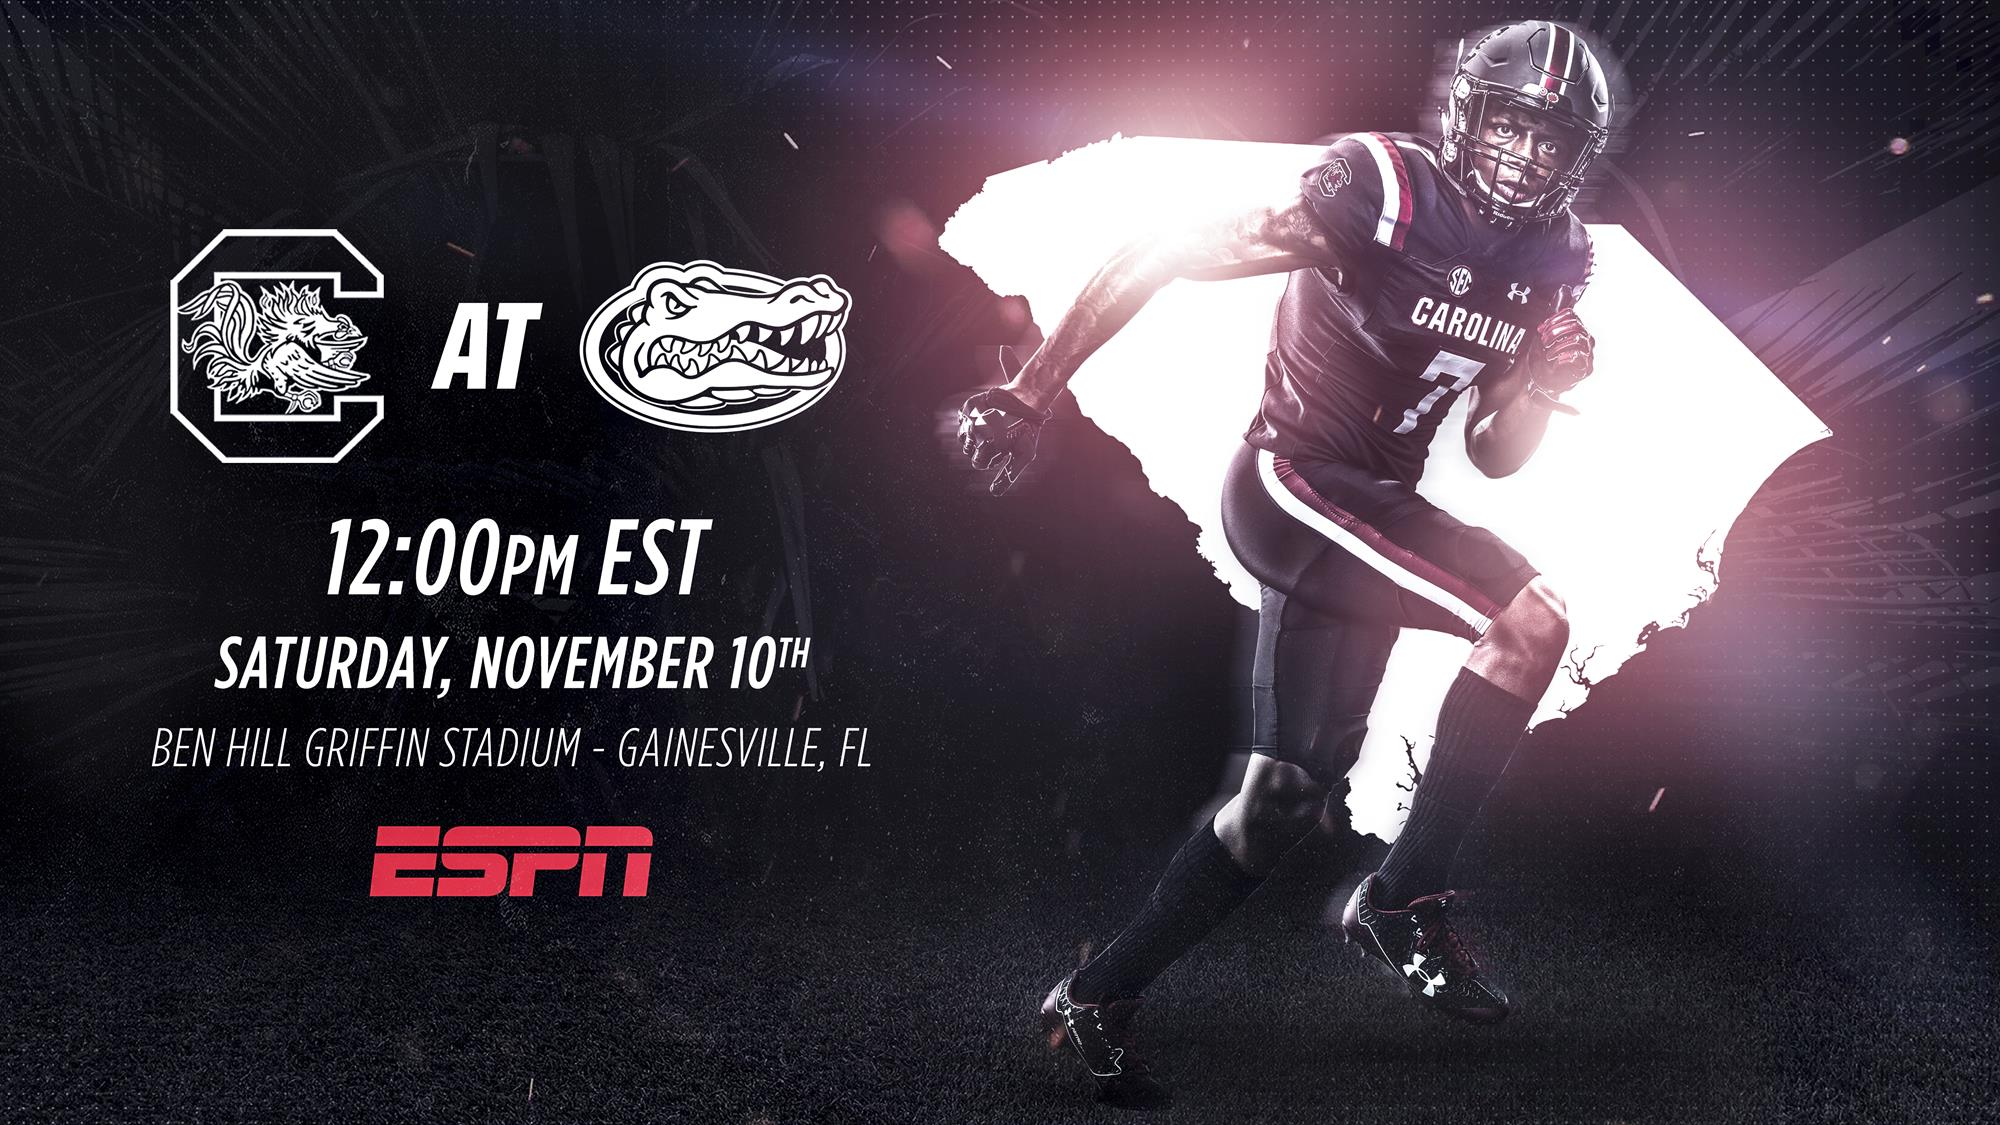 Gamecocks Travel to The Swamp For Noon Battle